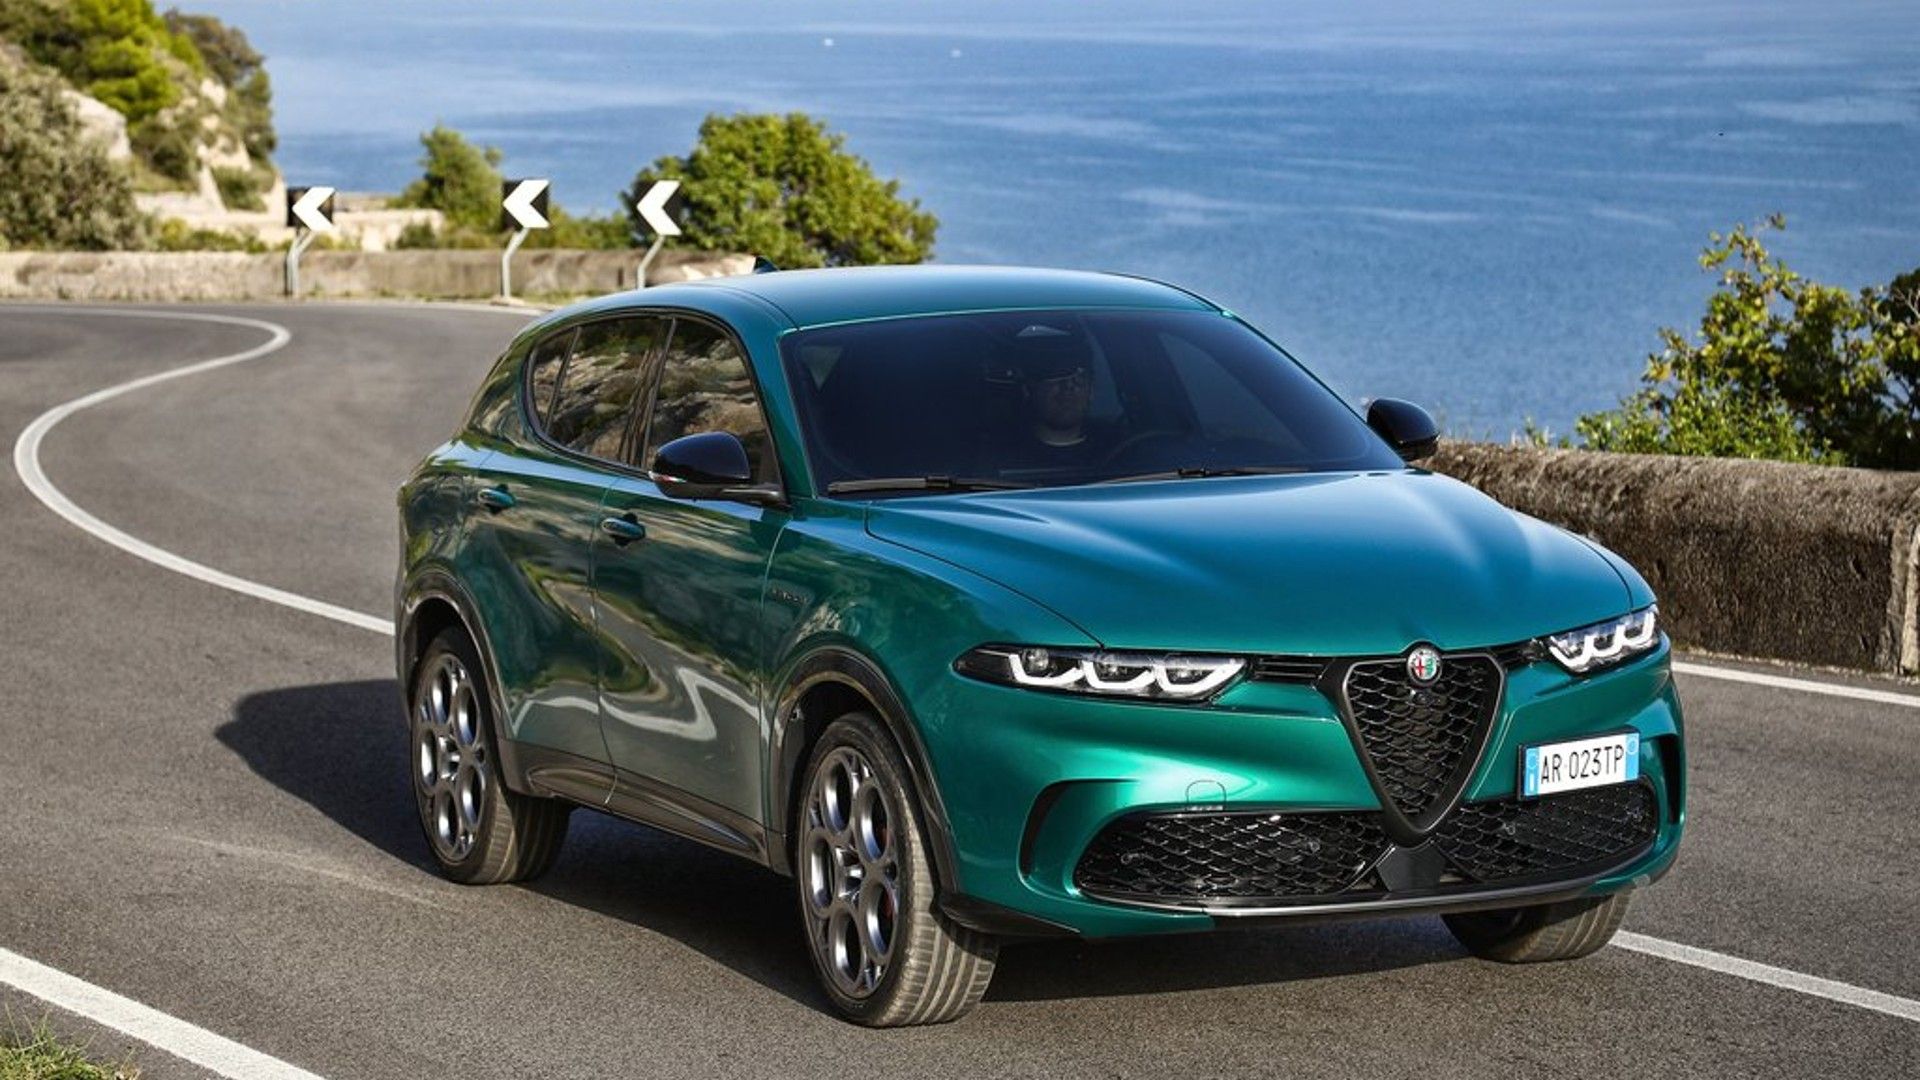 Alfa Romeo To Introduce A High-Performance Electric SUV For The U.S. Market